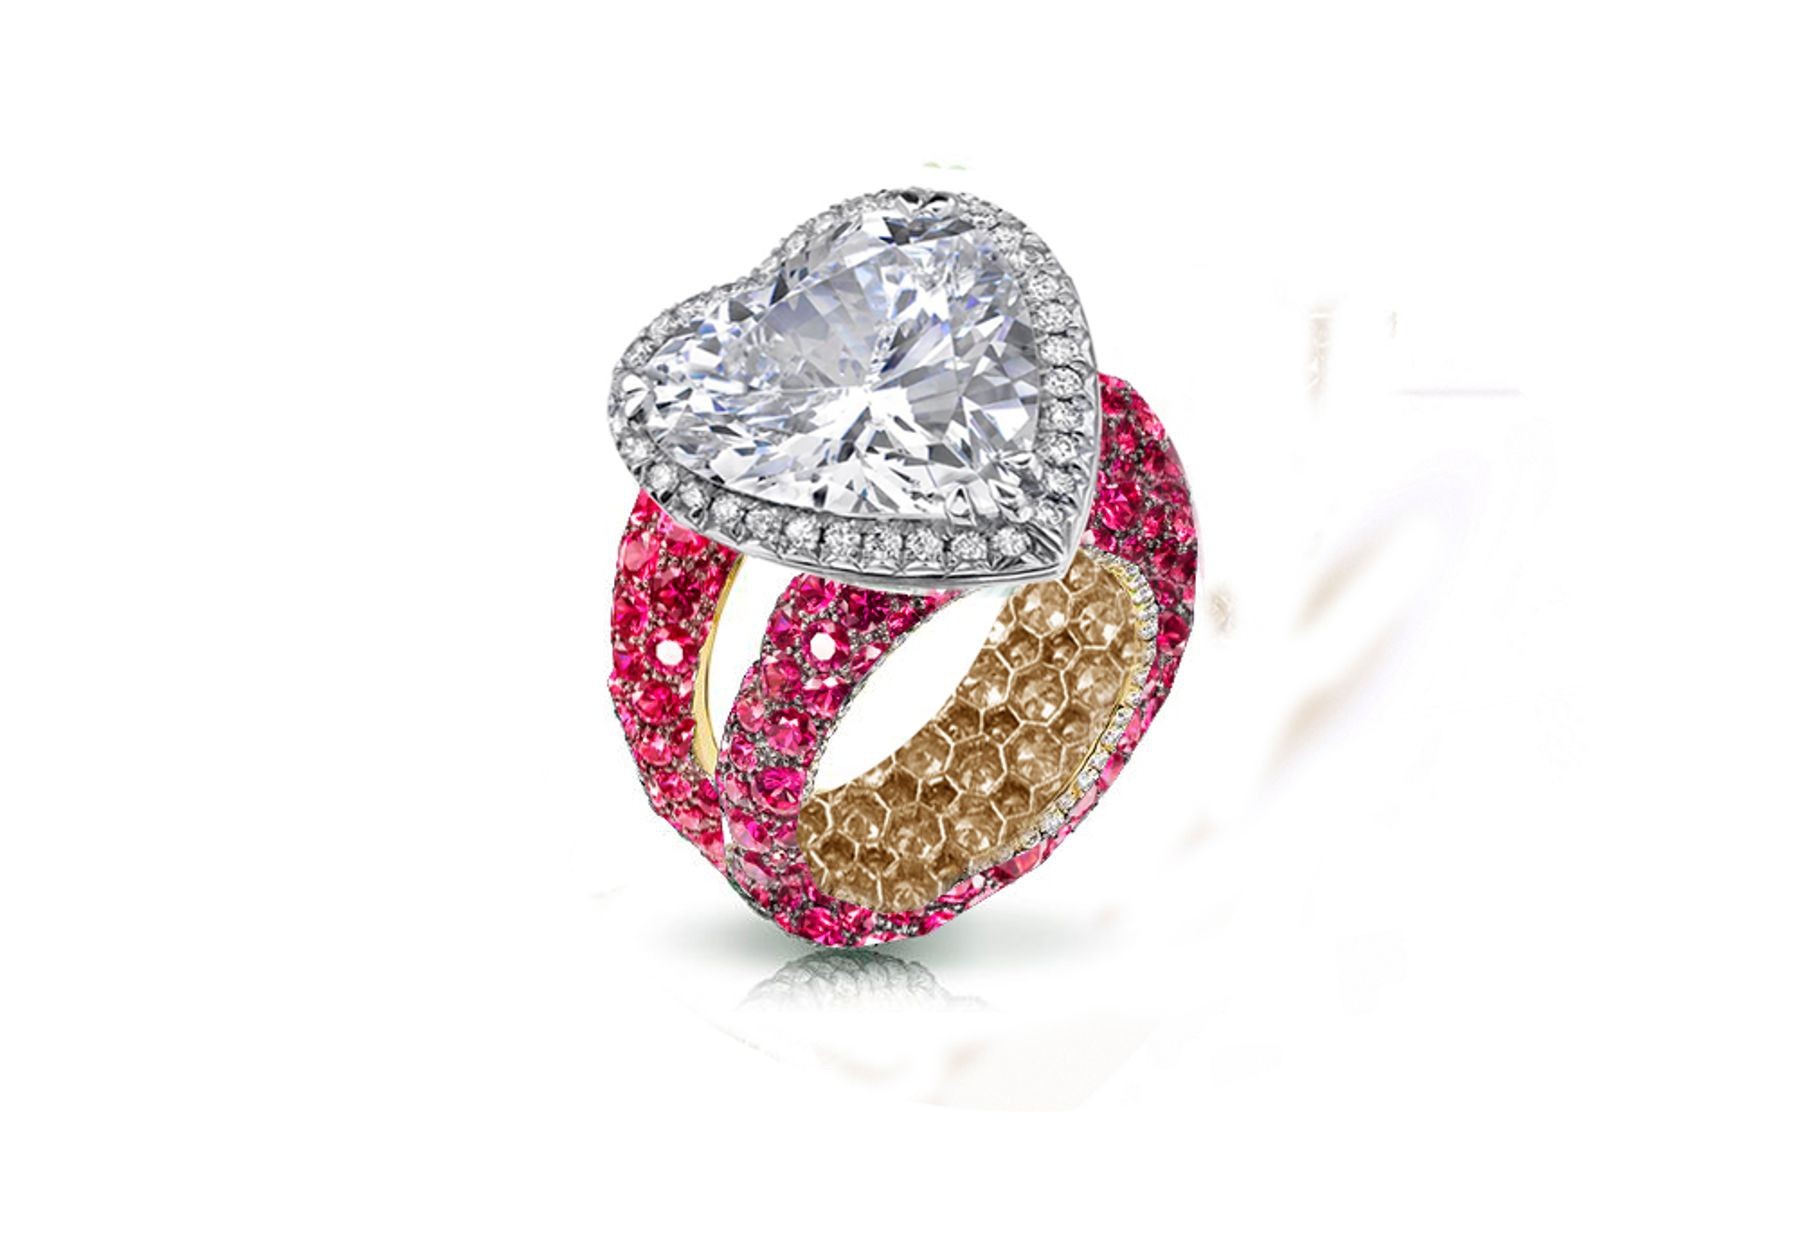 Ring with Heart Diamond & Pave Set Rubies & White Diamonds in Gold or Platinum